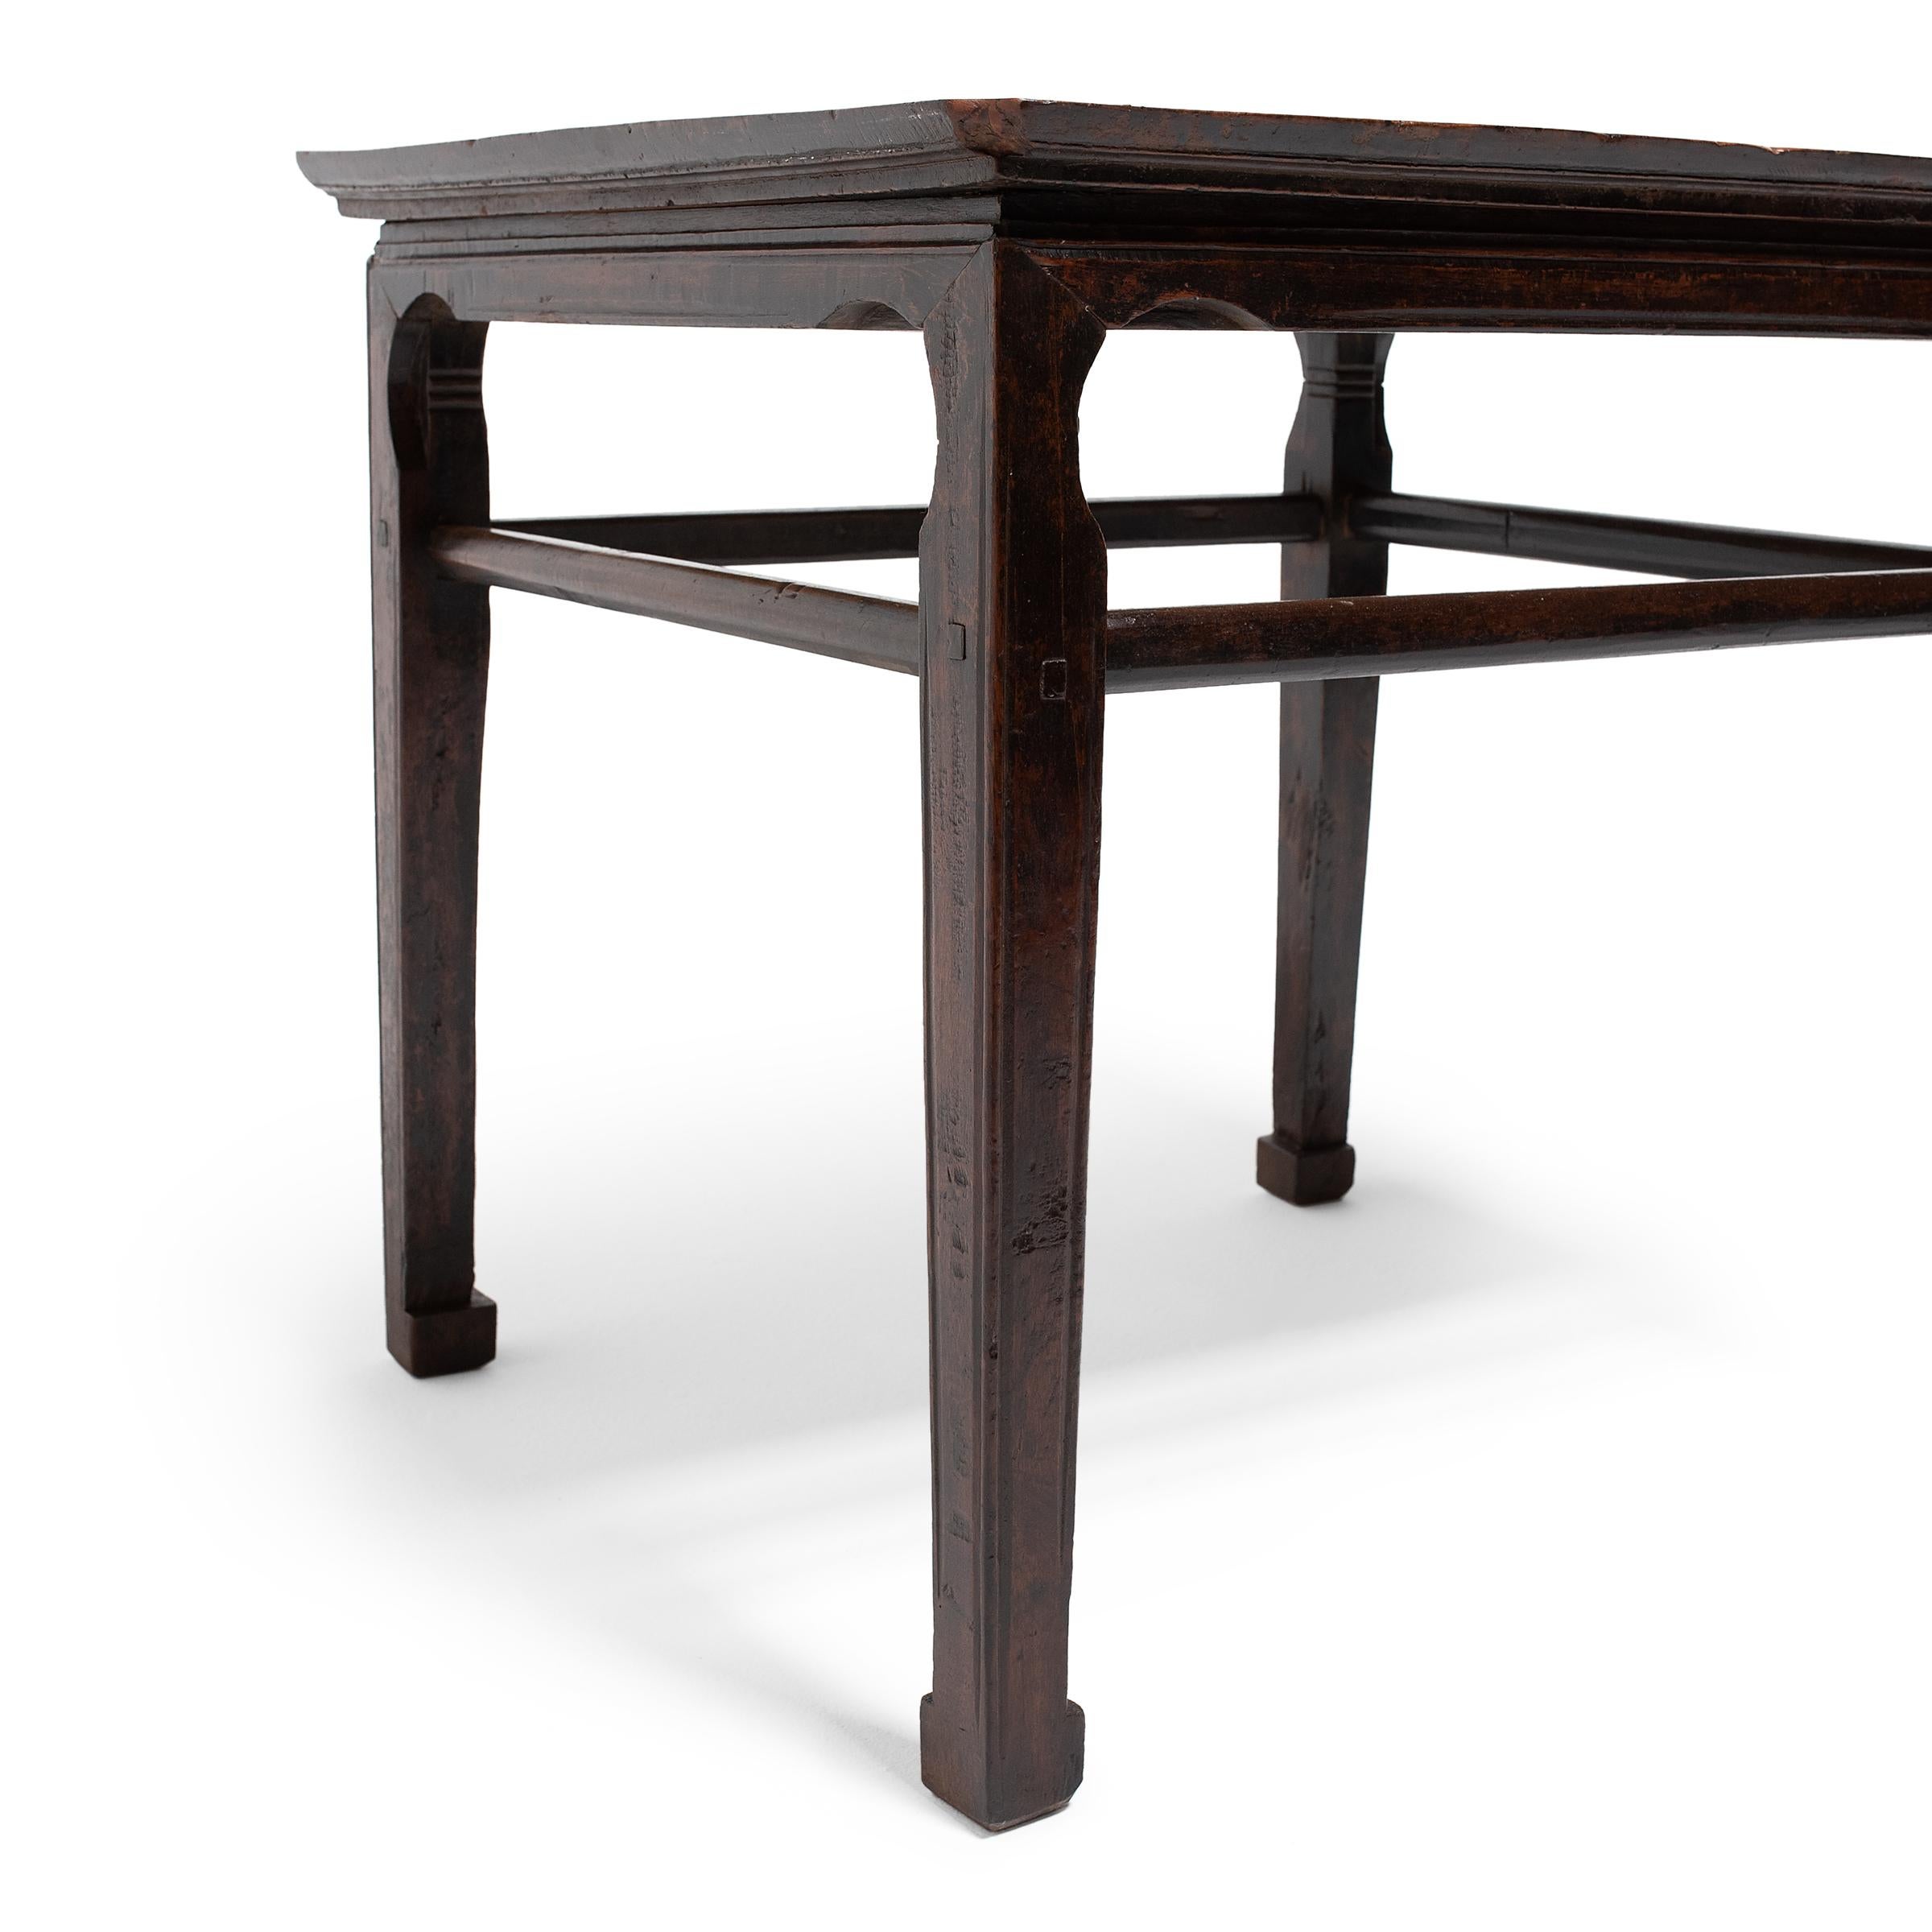 Chinese Square Burlwood Table, c. 1850 For Sale 1